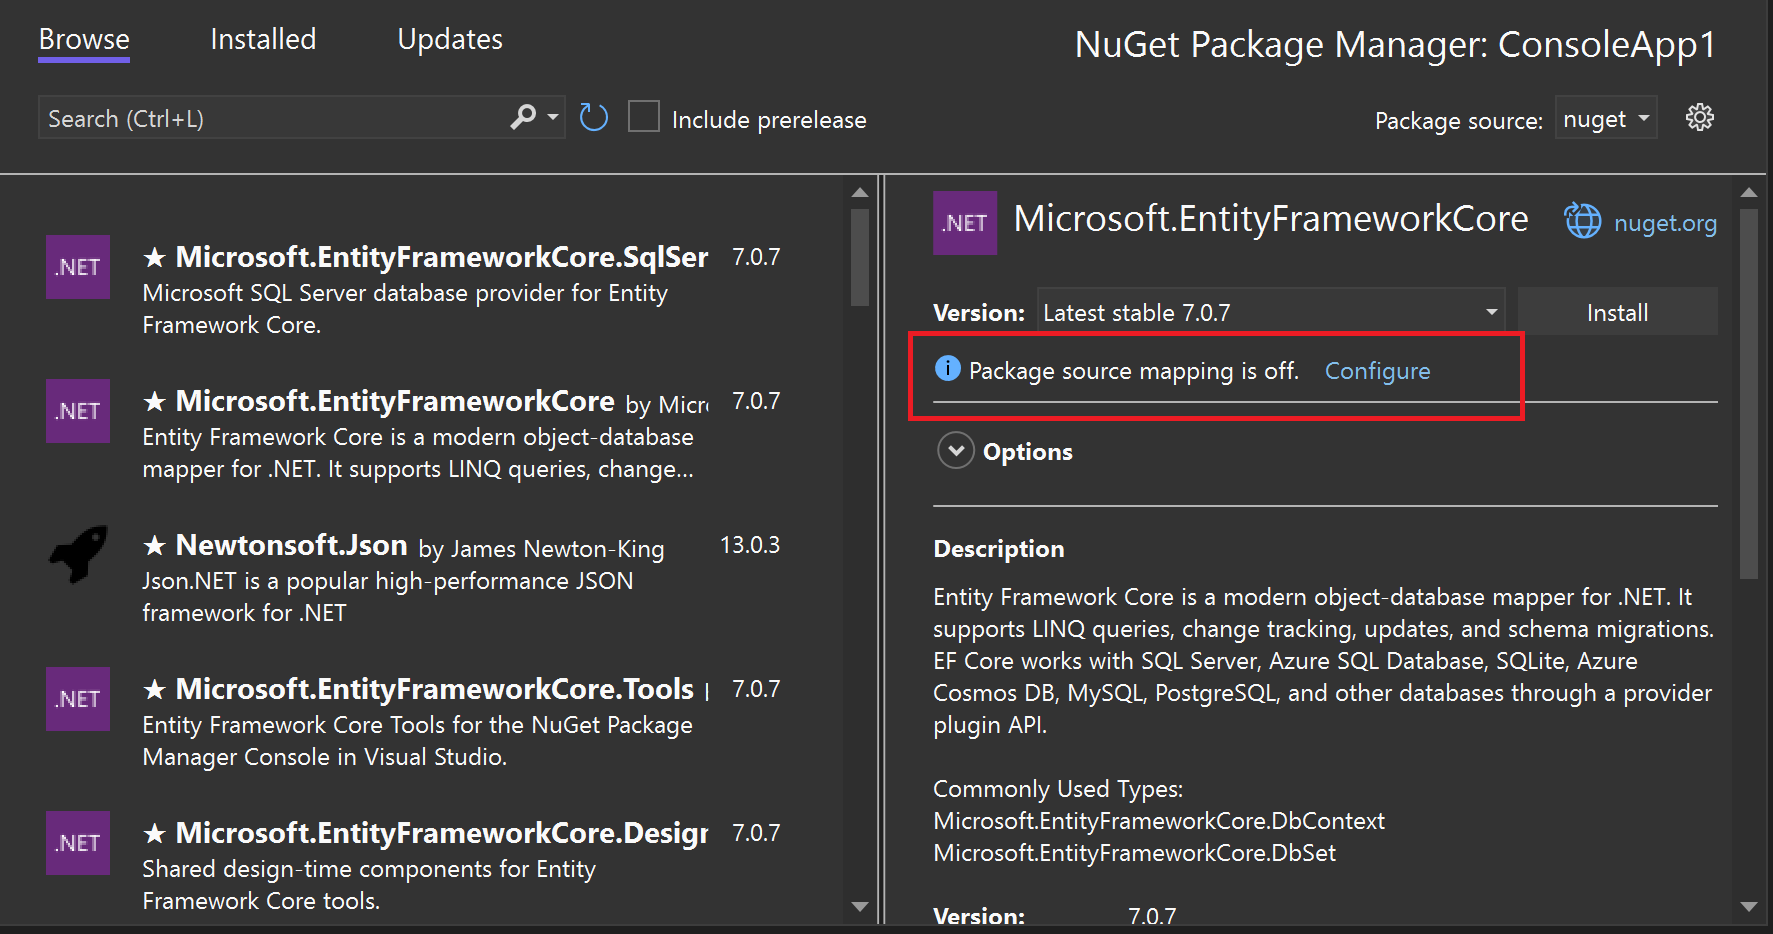 The NuGet Package Manager window in Visual Studio showing a selected package, and a highlight around the "Package source mapping is off" status with a Configure button.